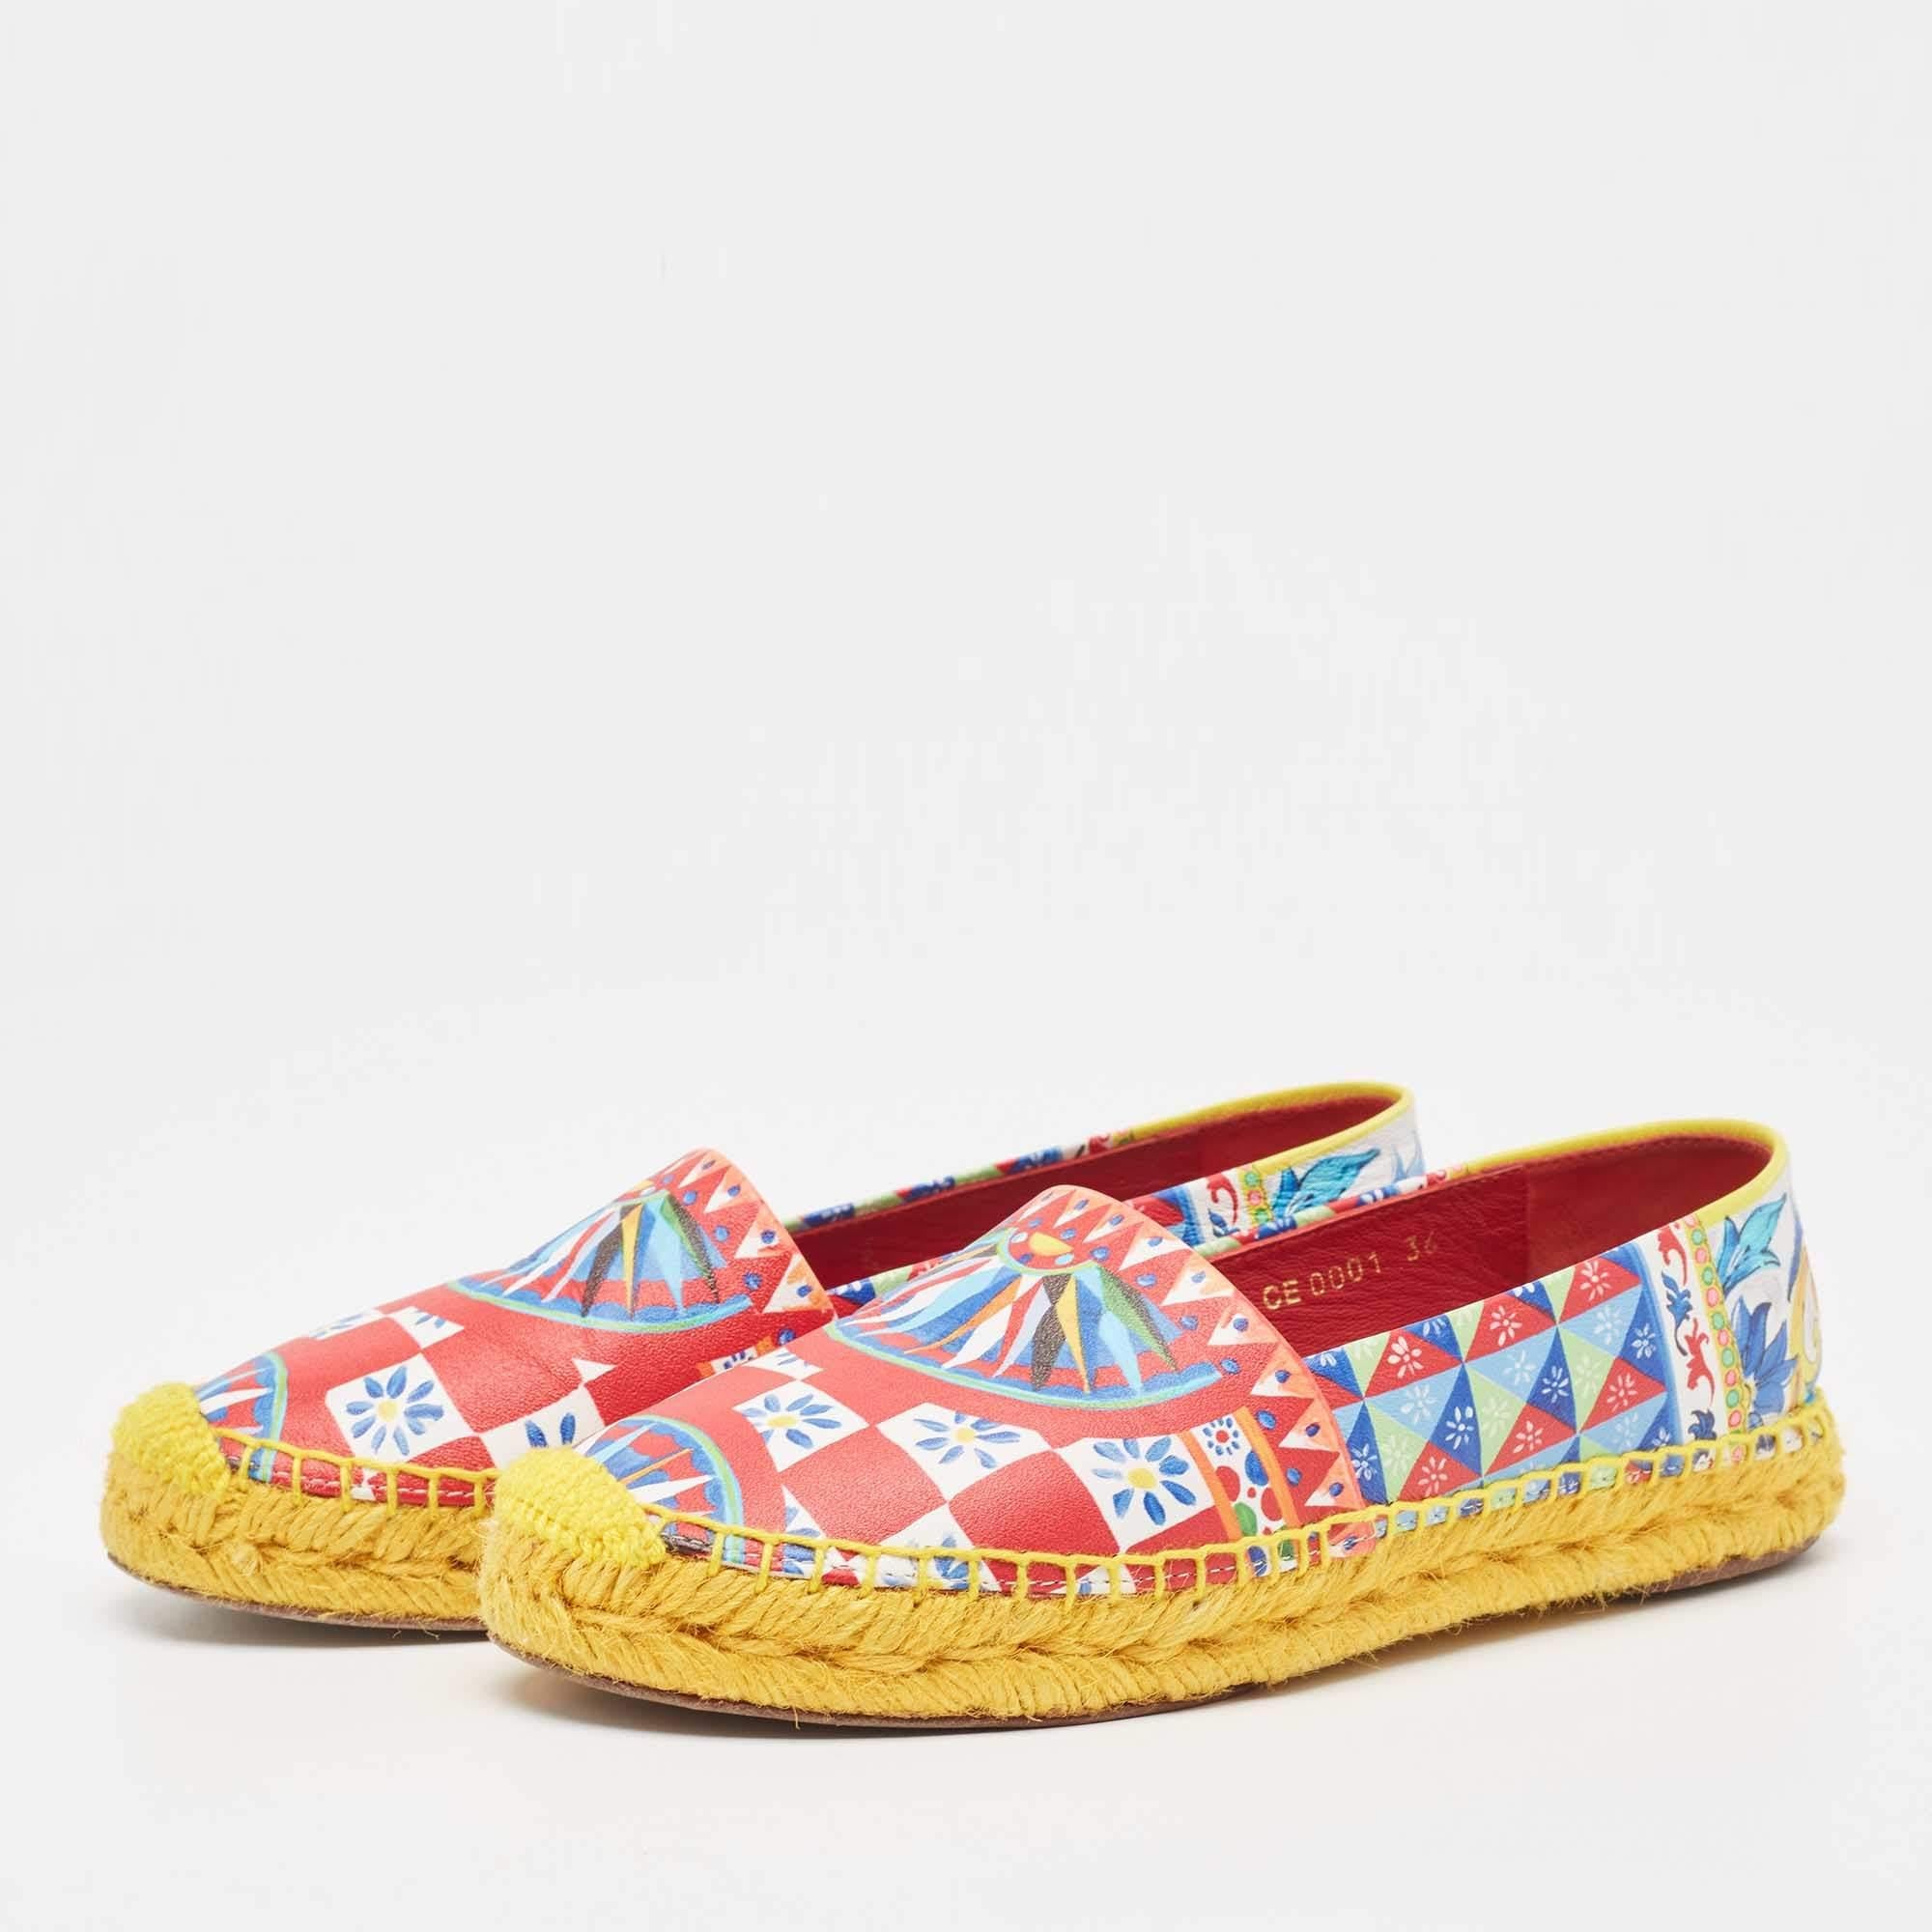 Constructed using canvas, these Dolce & Gabbana espadrille flats feature a durable design laden with comfort. The exterior is detailed with prints and laid on espadrille midsoles and leather soles.

